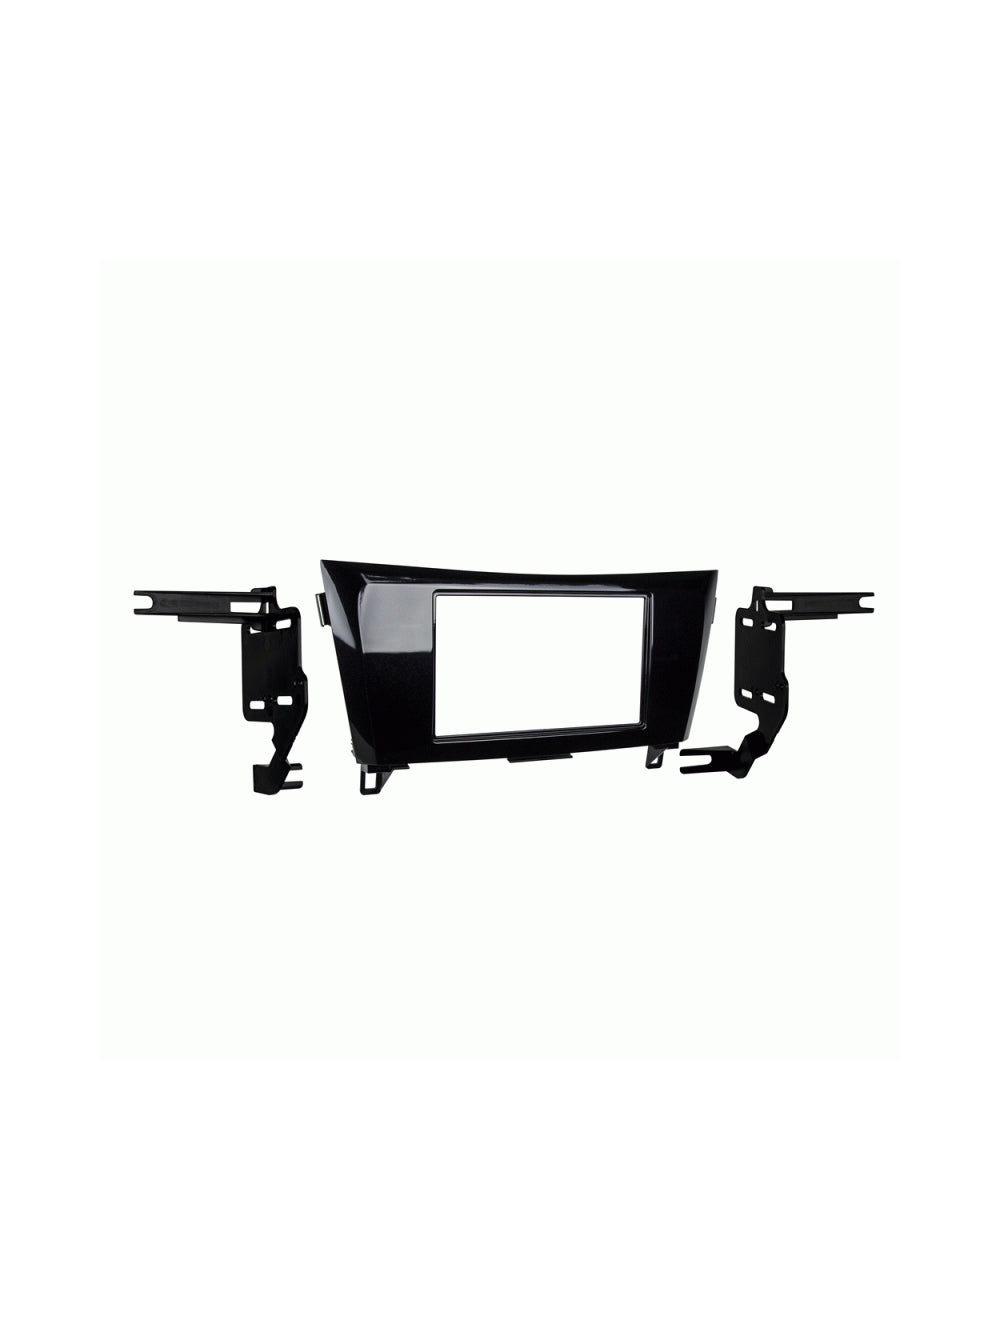 Metra 95-7622HG Double DIN Installation Dash Kit for 2014-Up Nissan Rogue Black